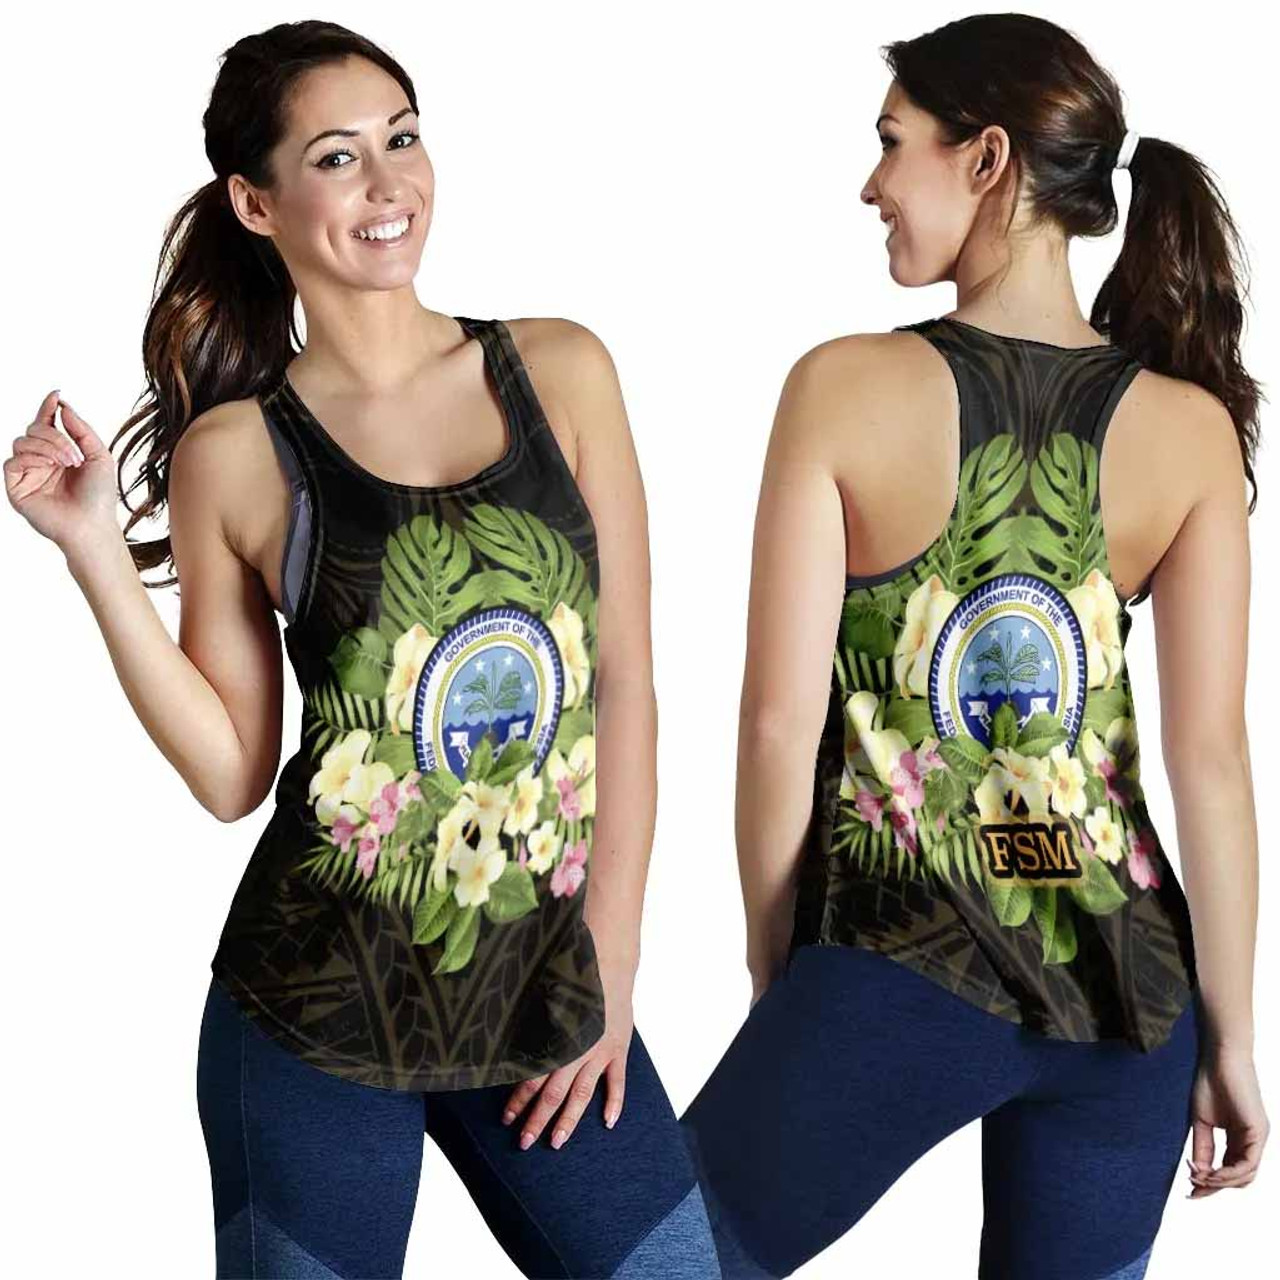 Federated States of Micronesia Women Racerback Tank - Polynesian Gold Patterns Collection 4